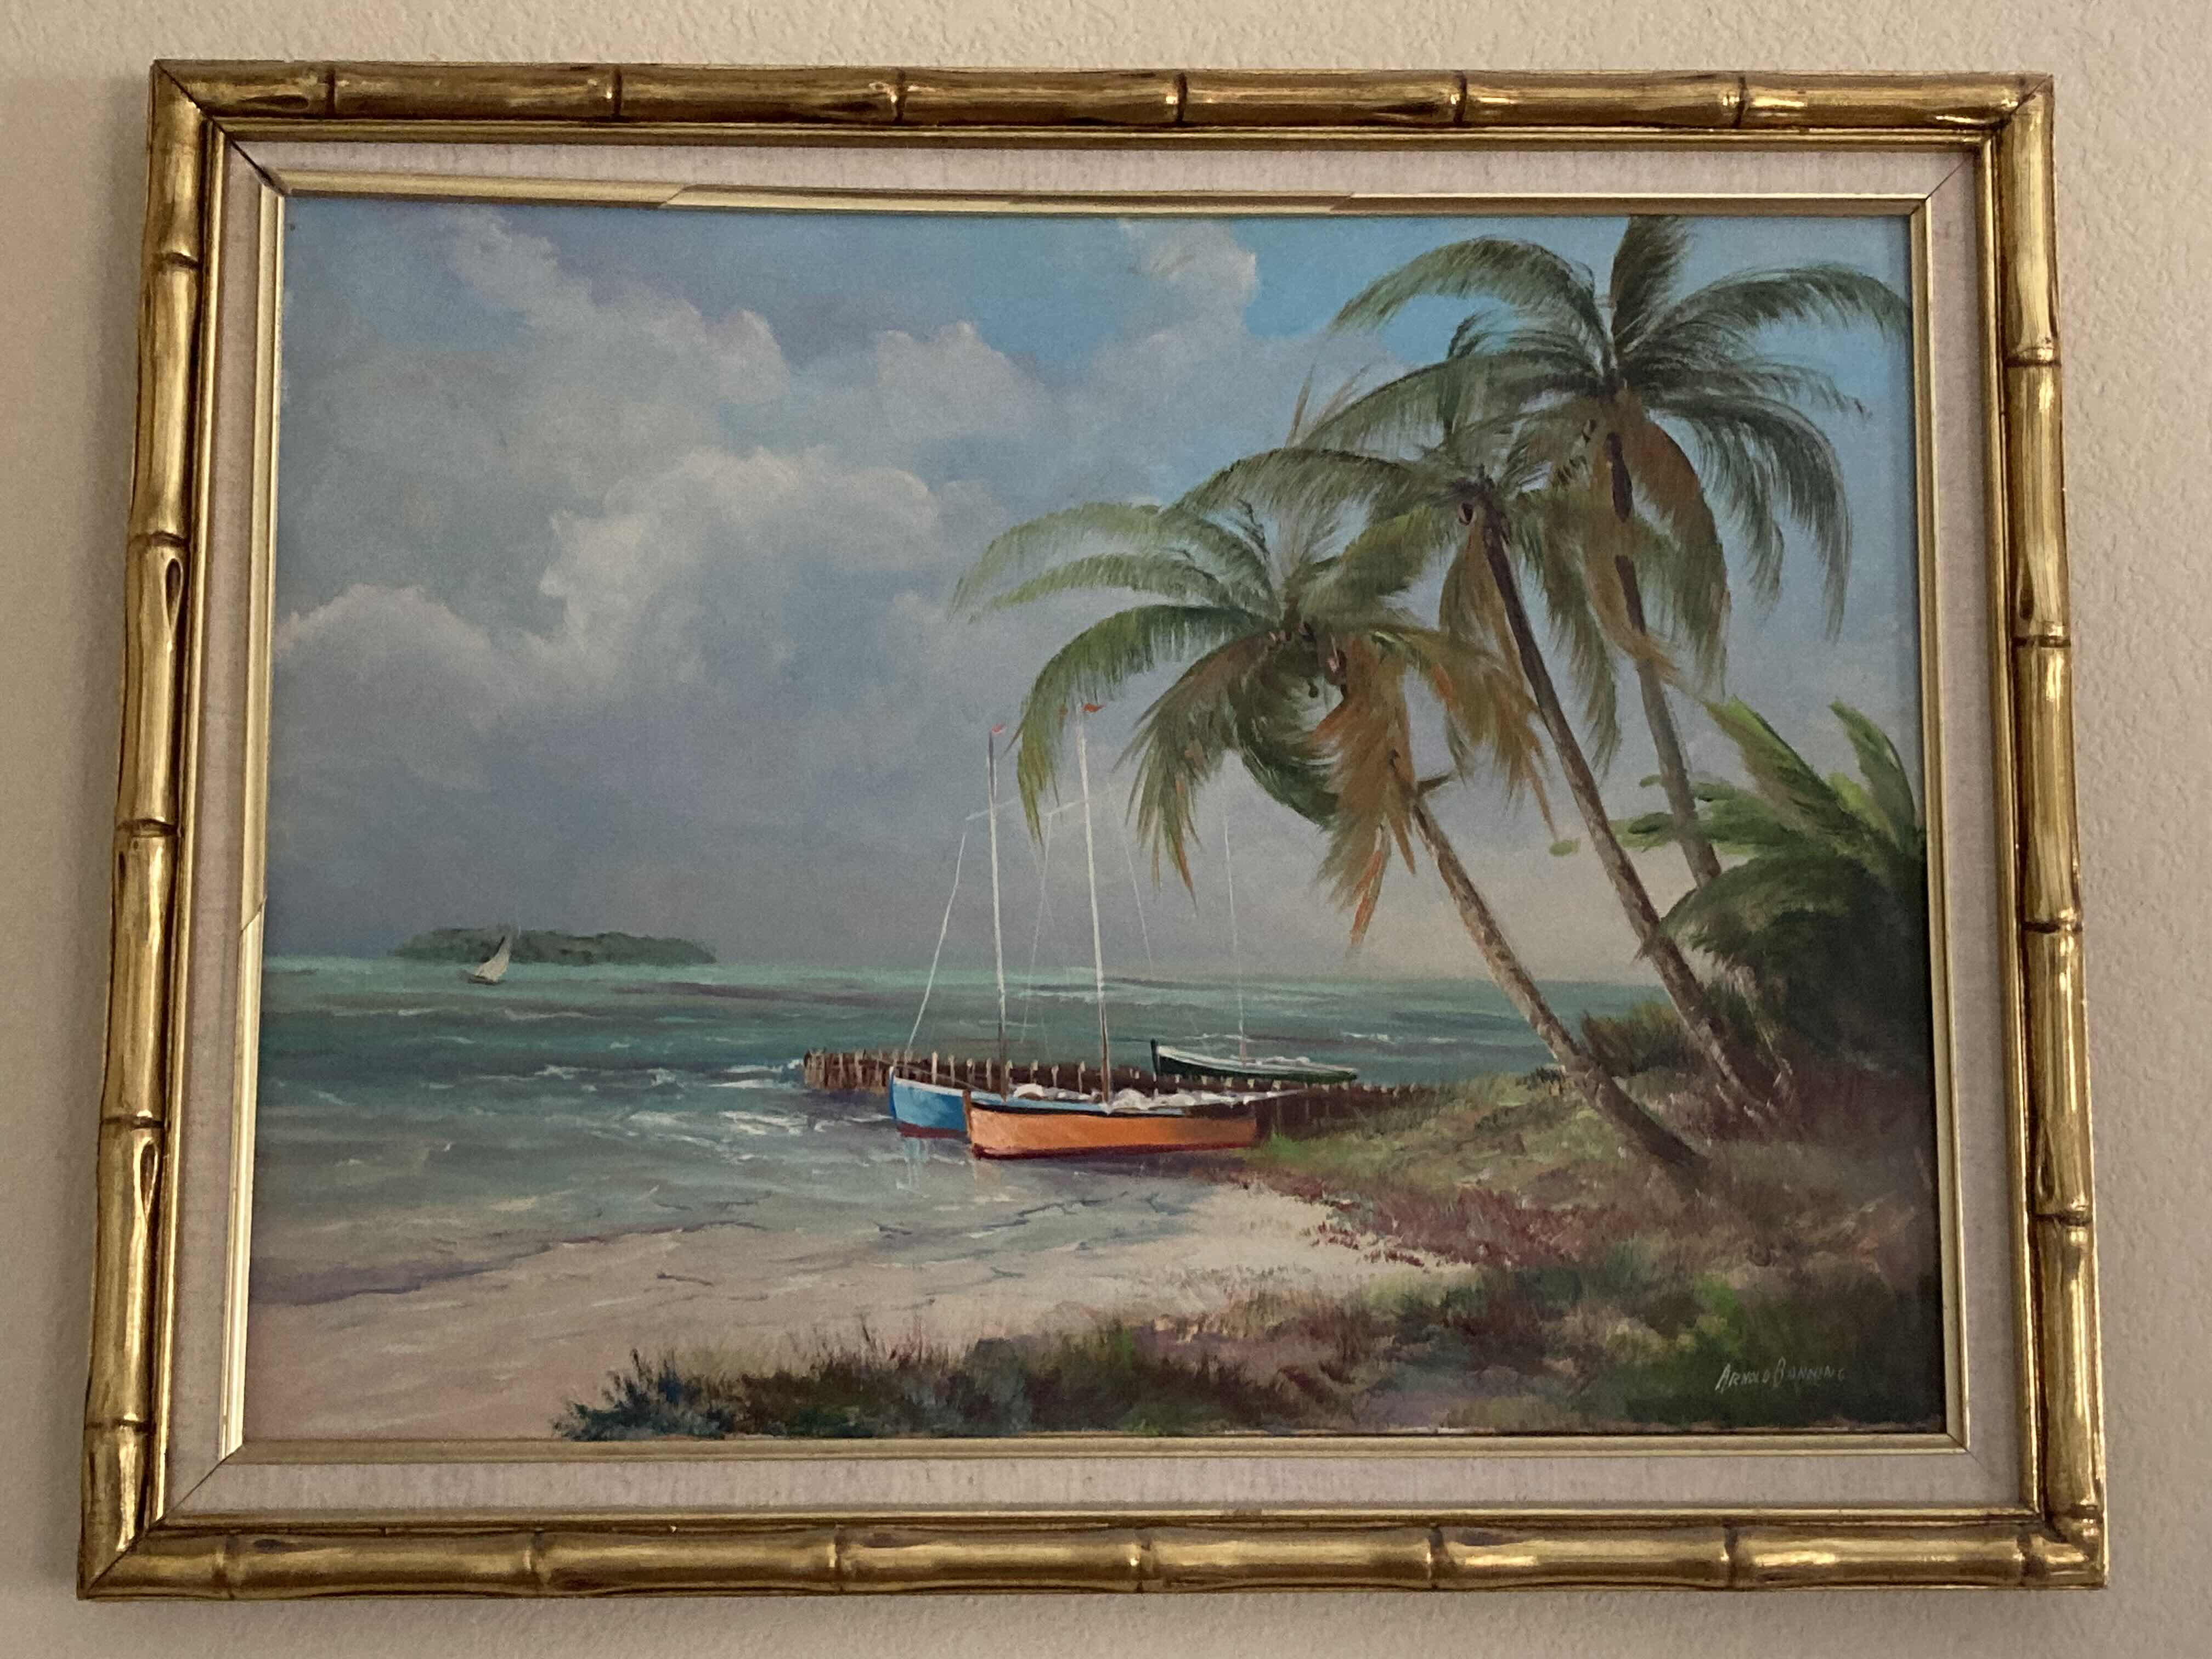 Photo 1 of ALONG THE FLORIDA KEYS FRAMED CANVAS OIL PAINTING SIGNED BY ARNOLD BANNING W BAMBOO STYLE FRAME & COA 27.5” X 21.5”